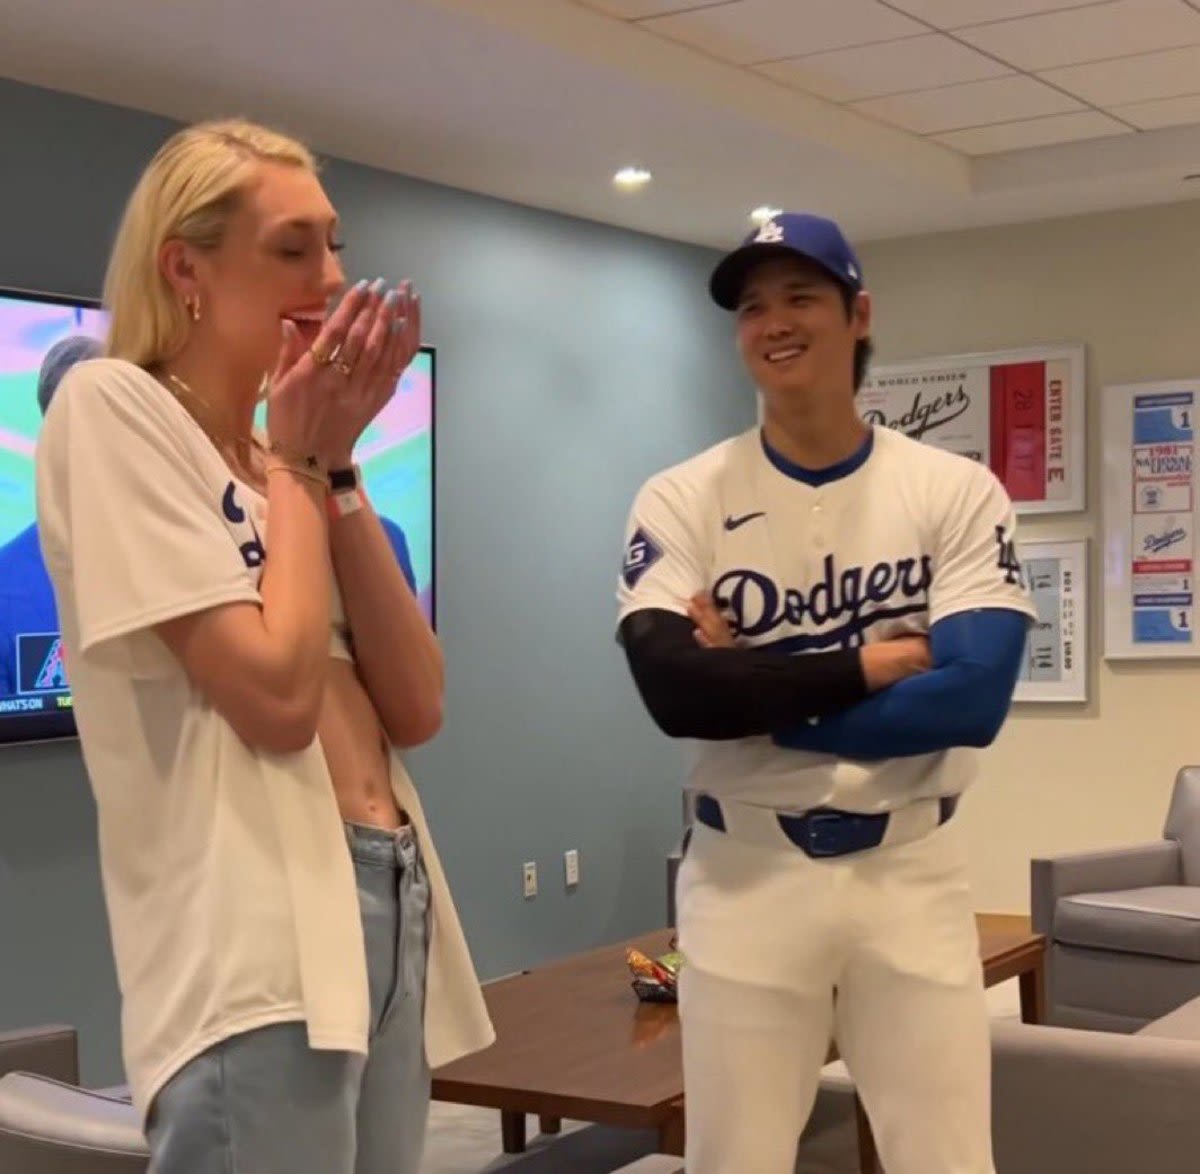 WNBA Rookie Cameron Brink's Interaction with Shohei Ohtani Goes Viral